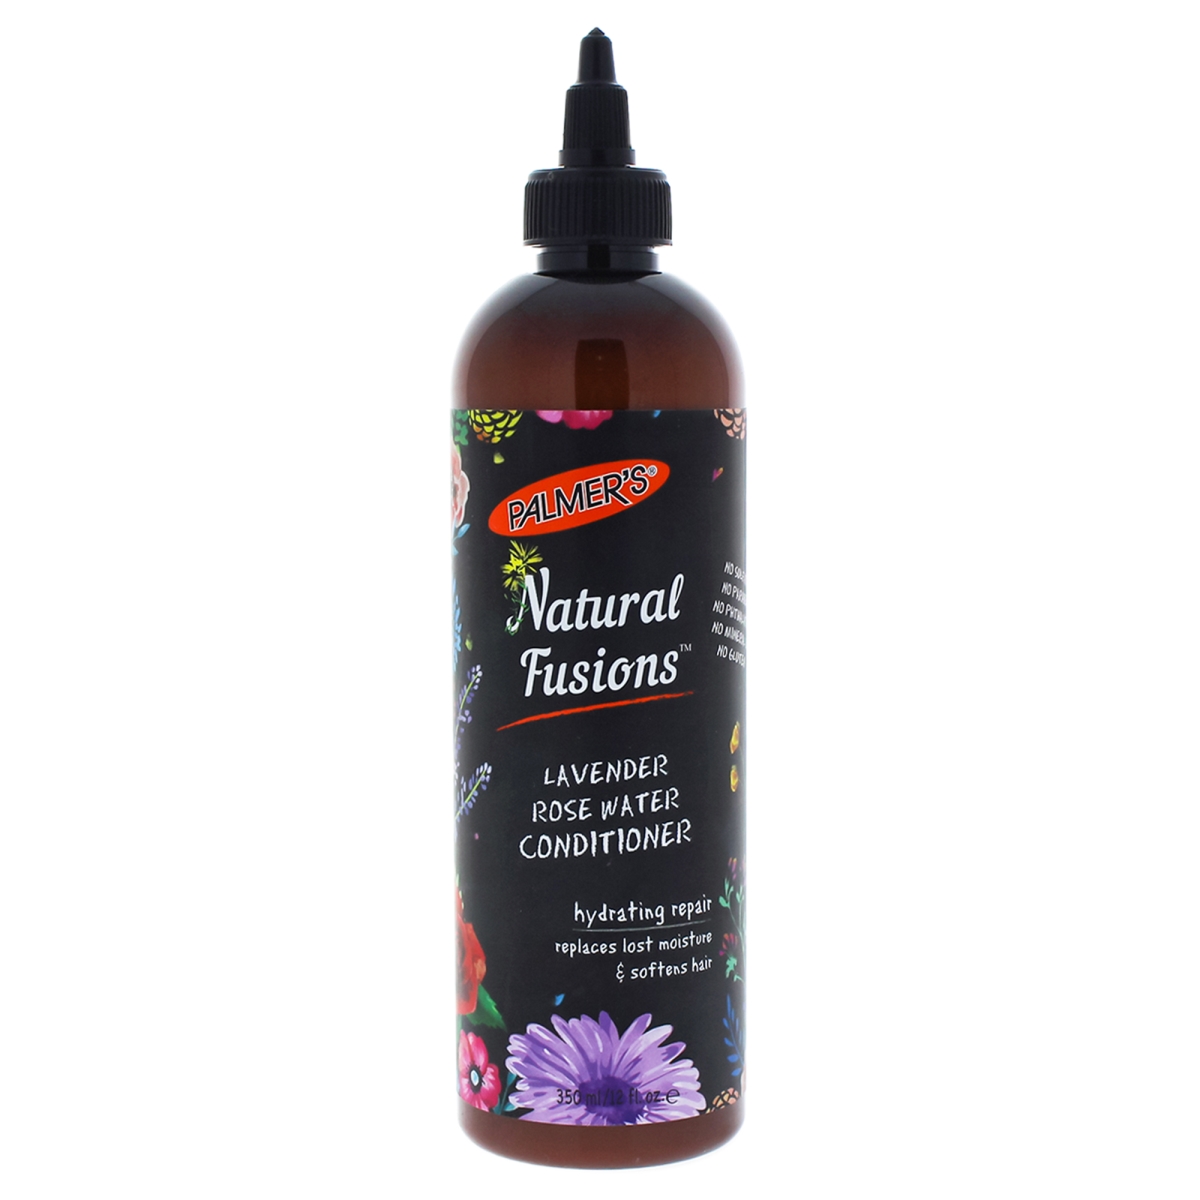 I0088439 Natural Fusions Conditioner Lavender Rose Water Conditioner For Unisex - 12 Oz